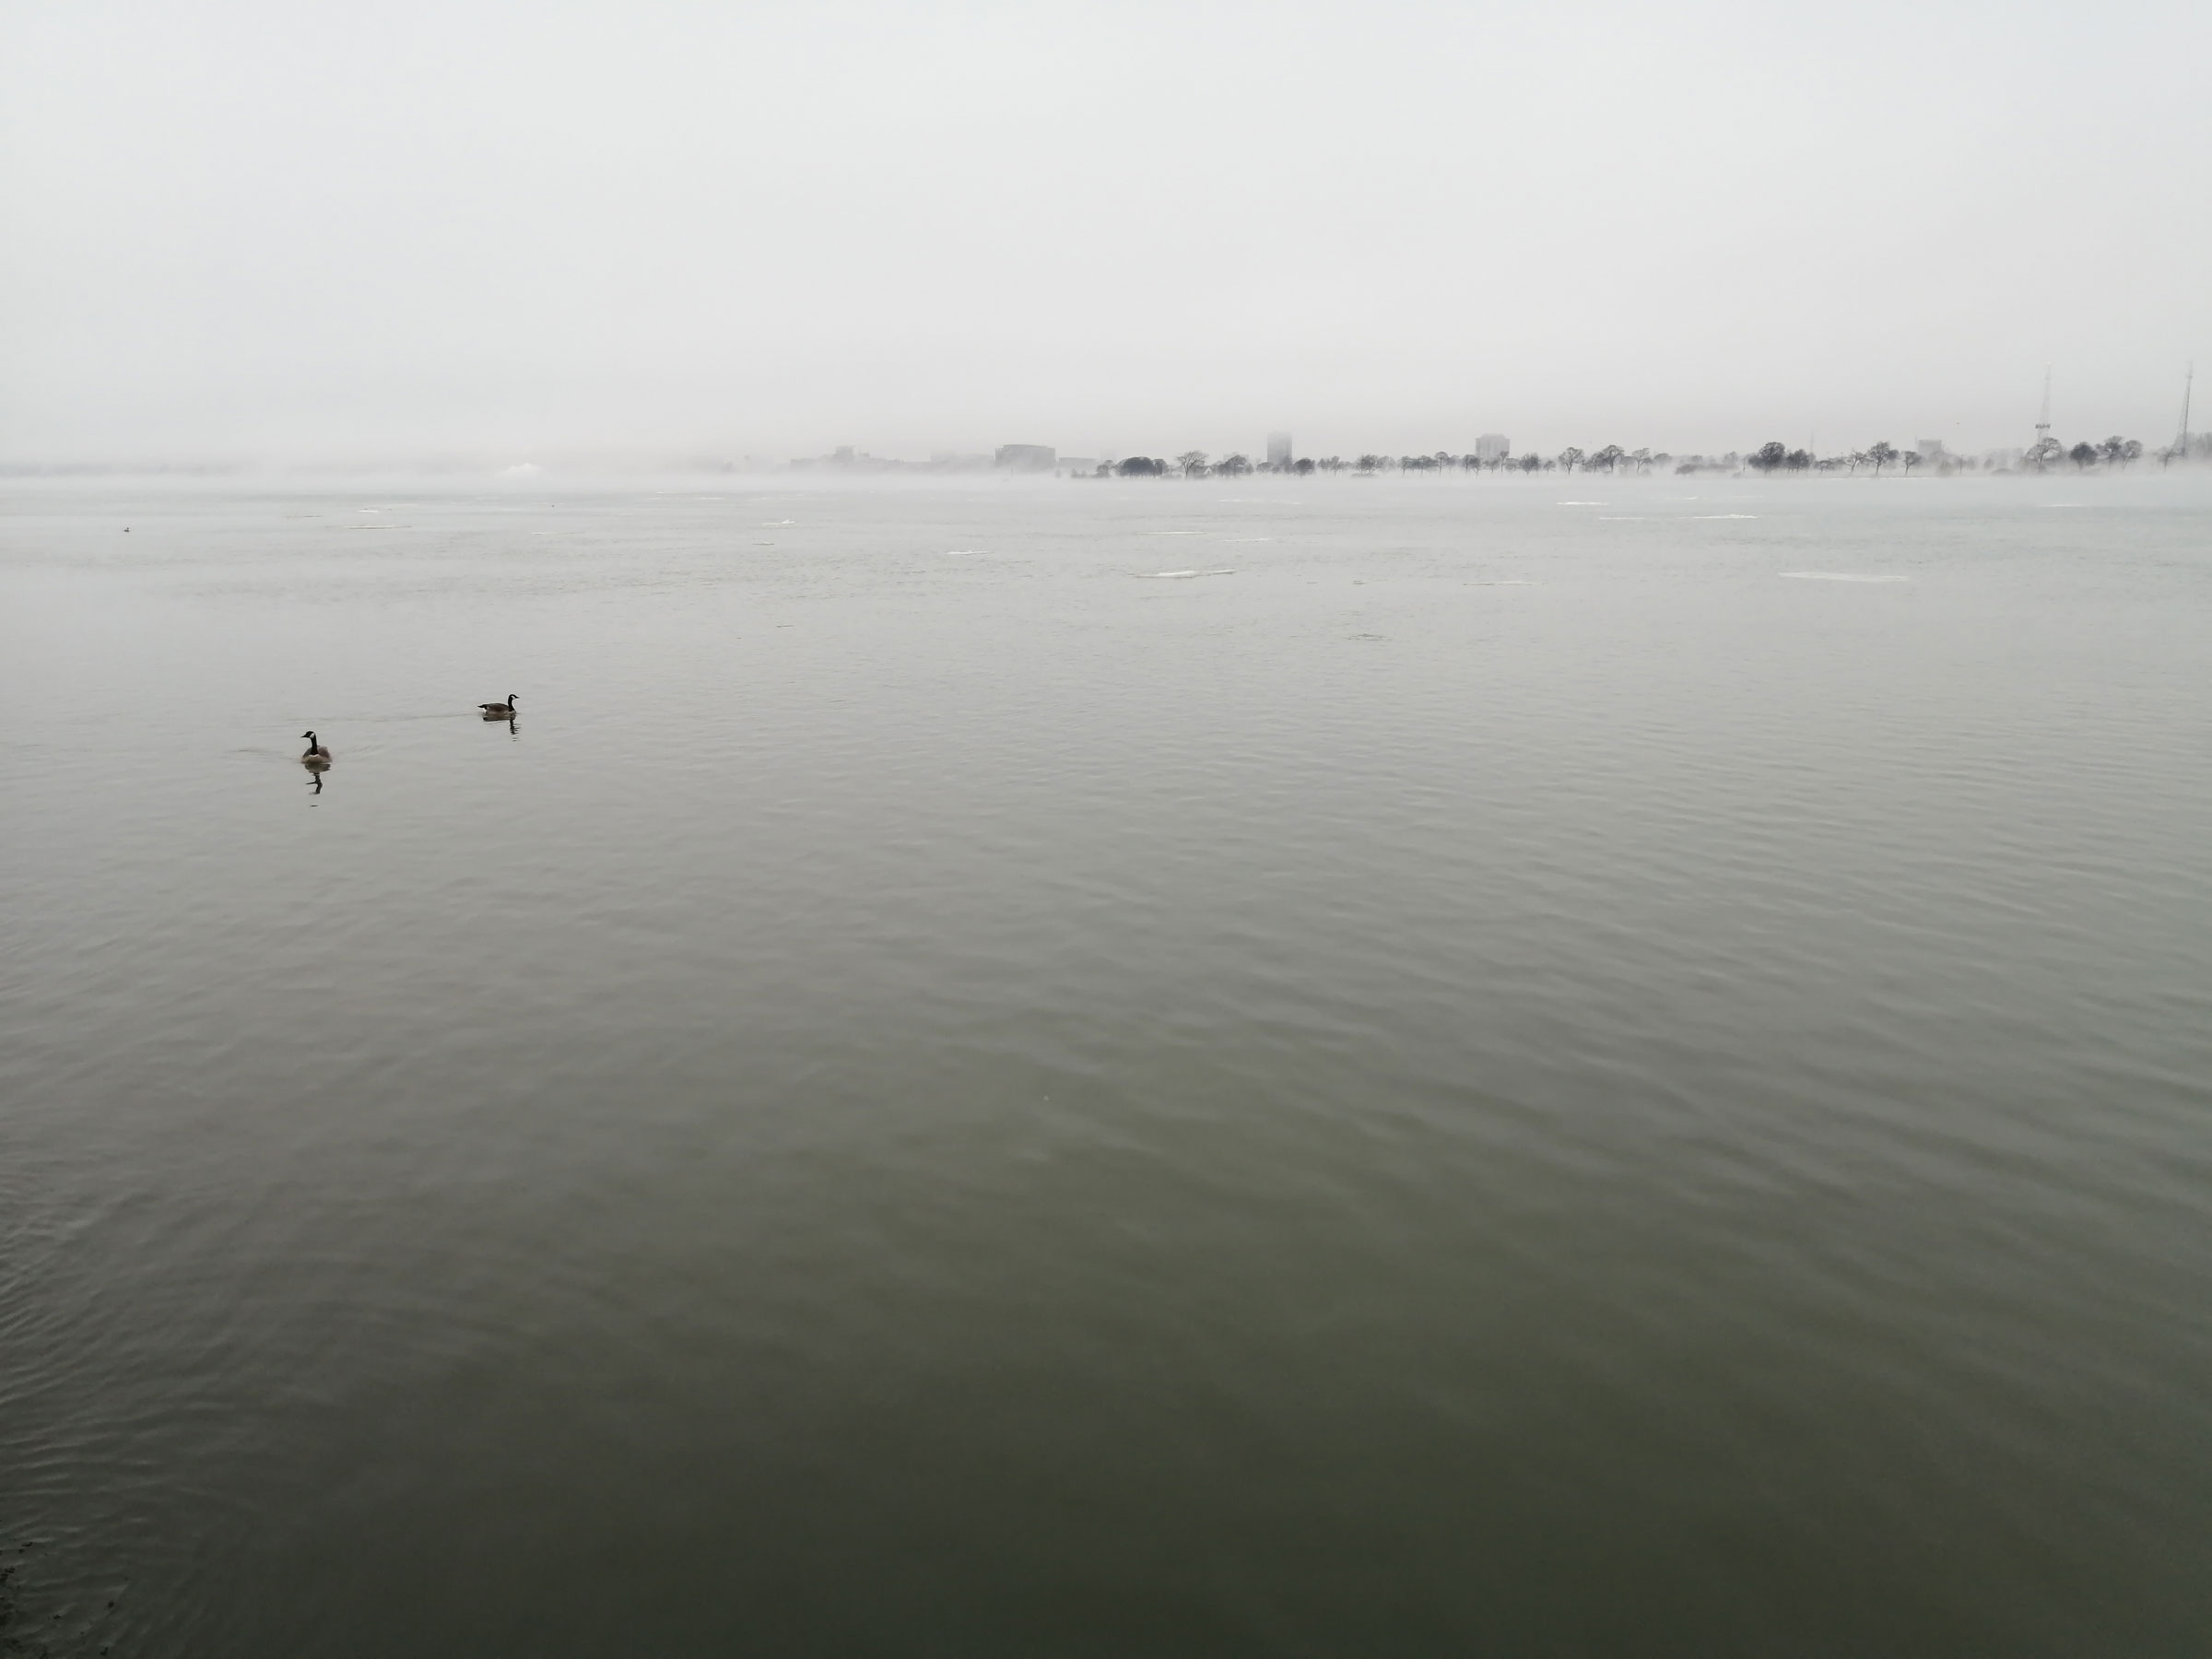 foggy lake that is predominantly silver gray, with two ducks on the surface in the midground